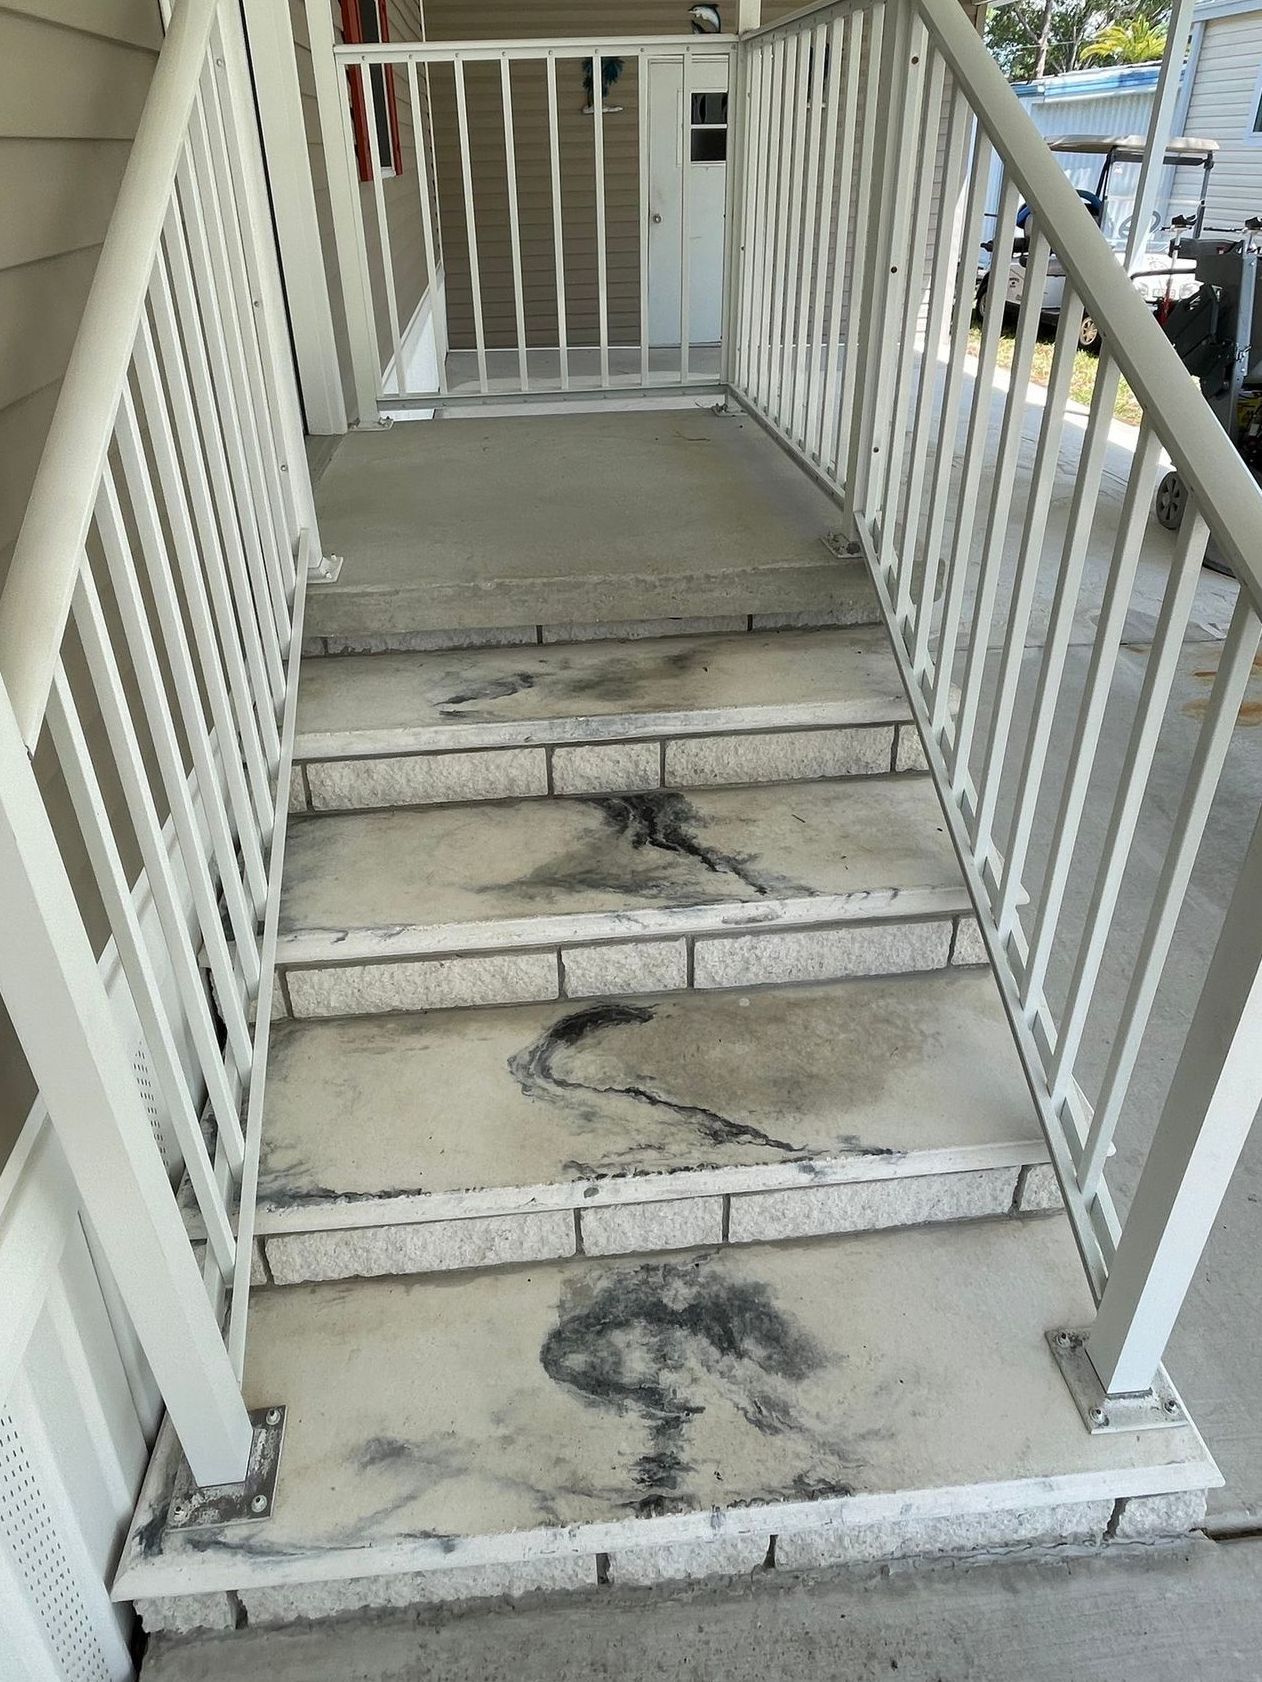 Bare concrete steps leading from driveway to front entrance of a house